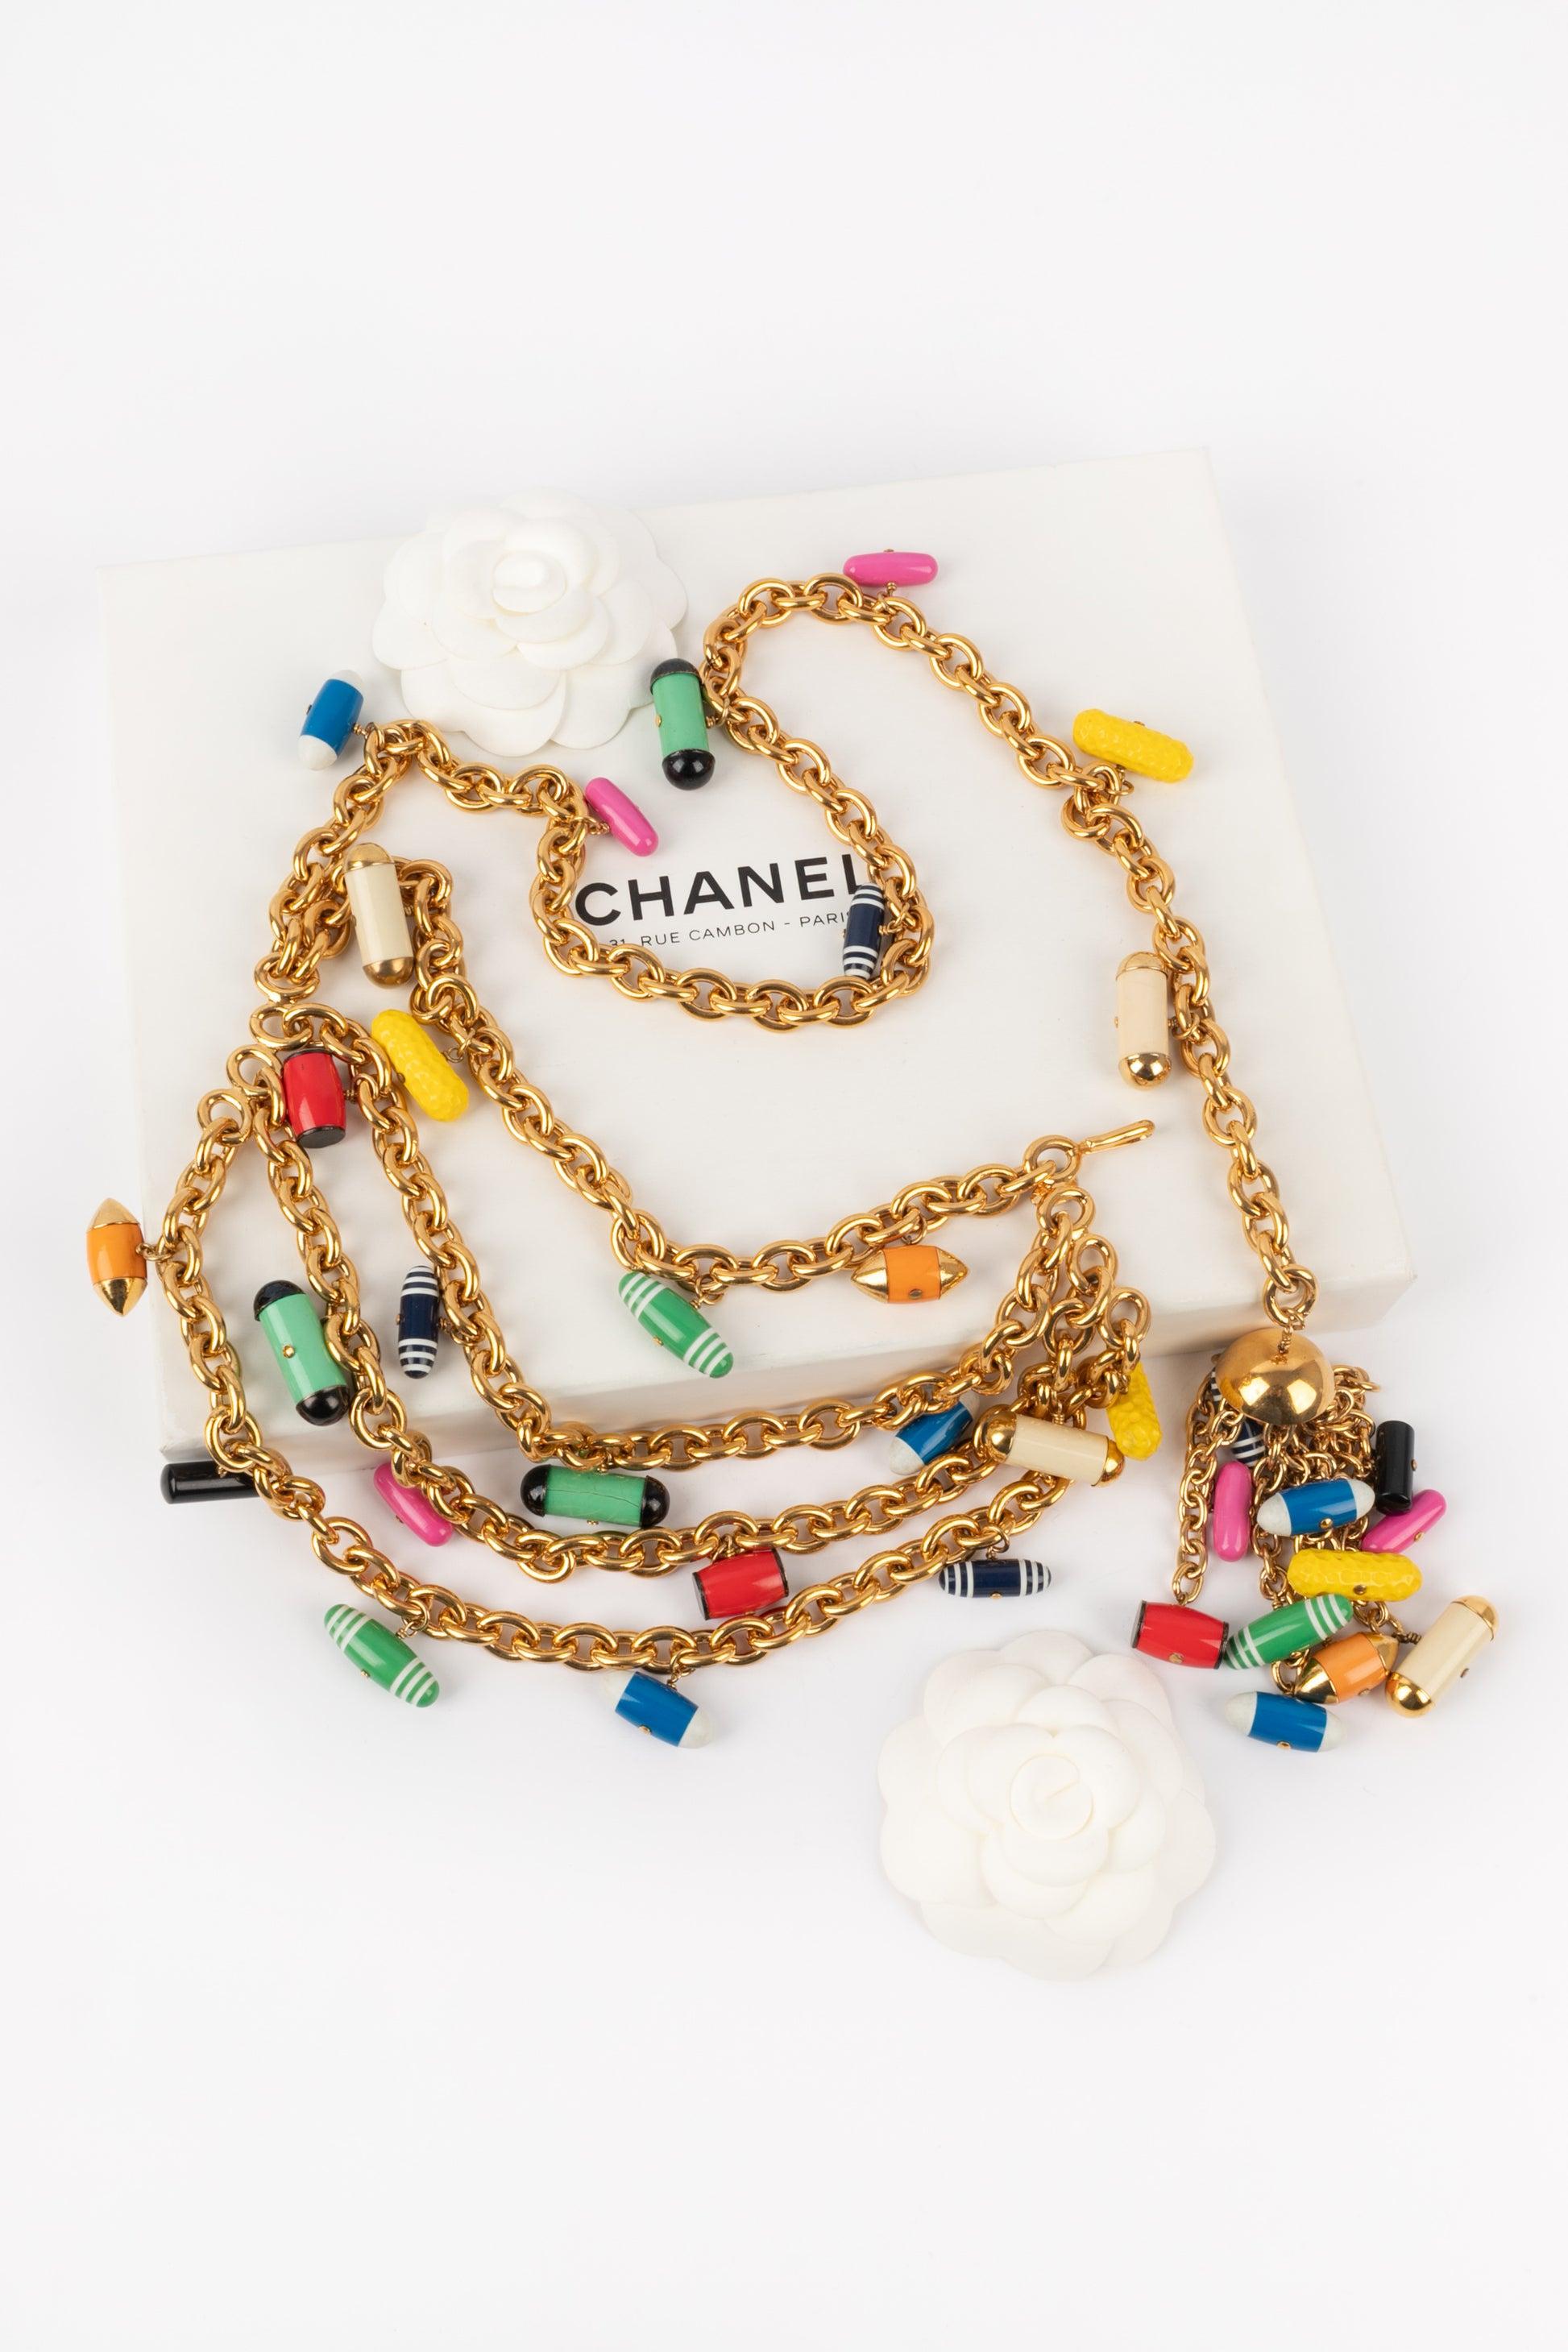 Chanel Golden Metal Belt Ornamented with Multicolored Resin Charms, 1992 For Sale 5